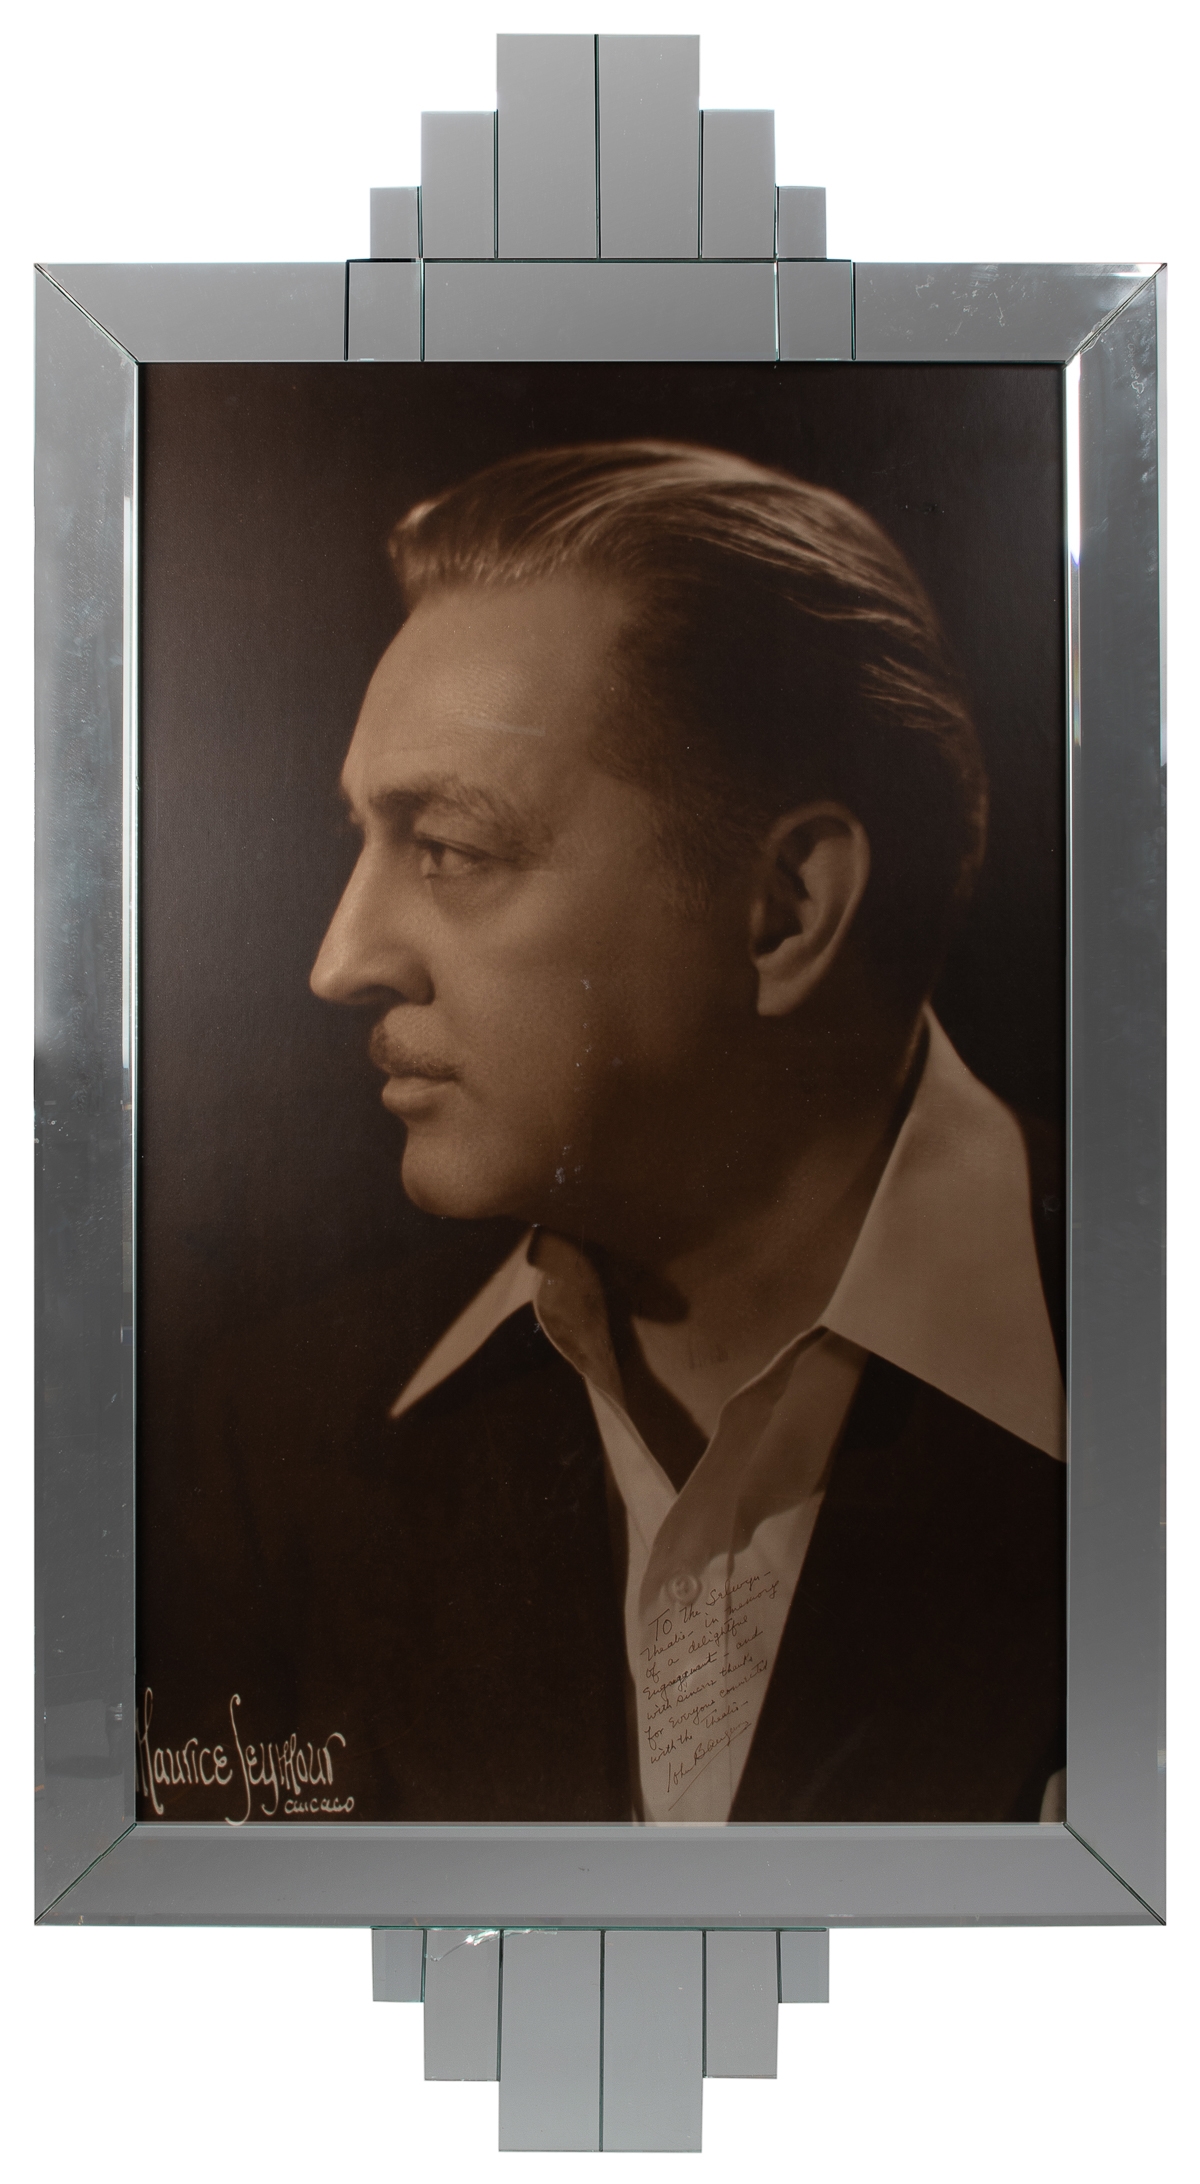 Enlarged photograph portrait by Maurice Seymour (Chicago) of John Barrymore (1882—1942 - Maurice Seymour